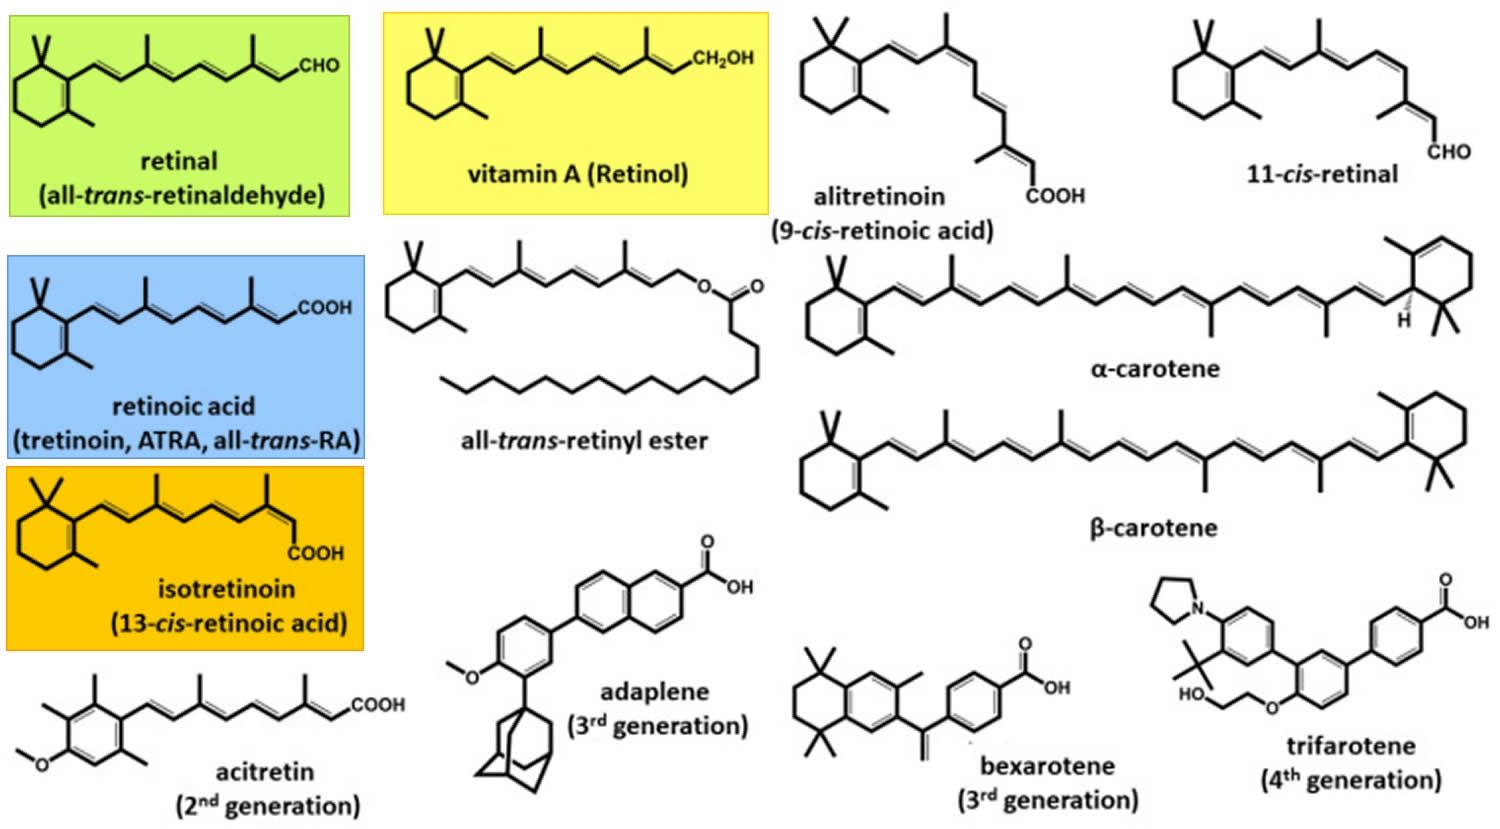 Vitamin A and retinoids structures